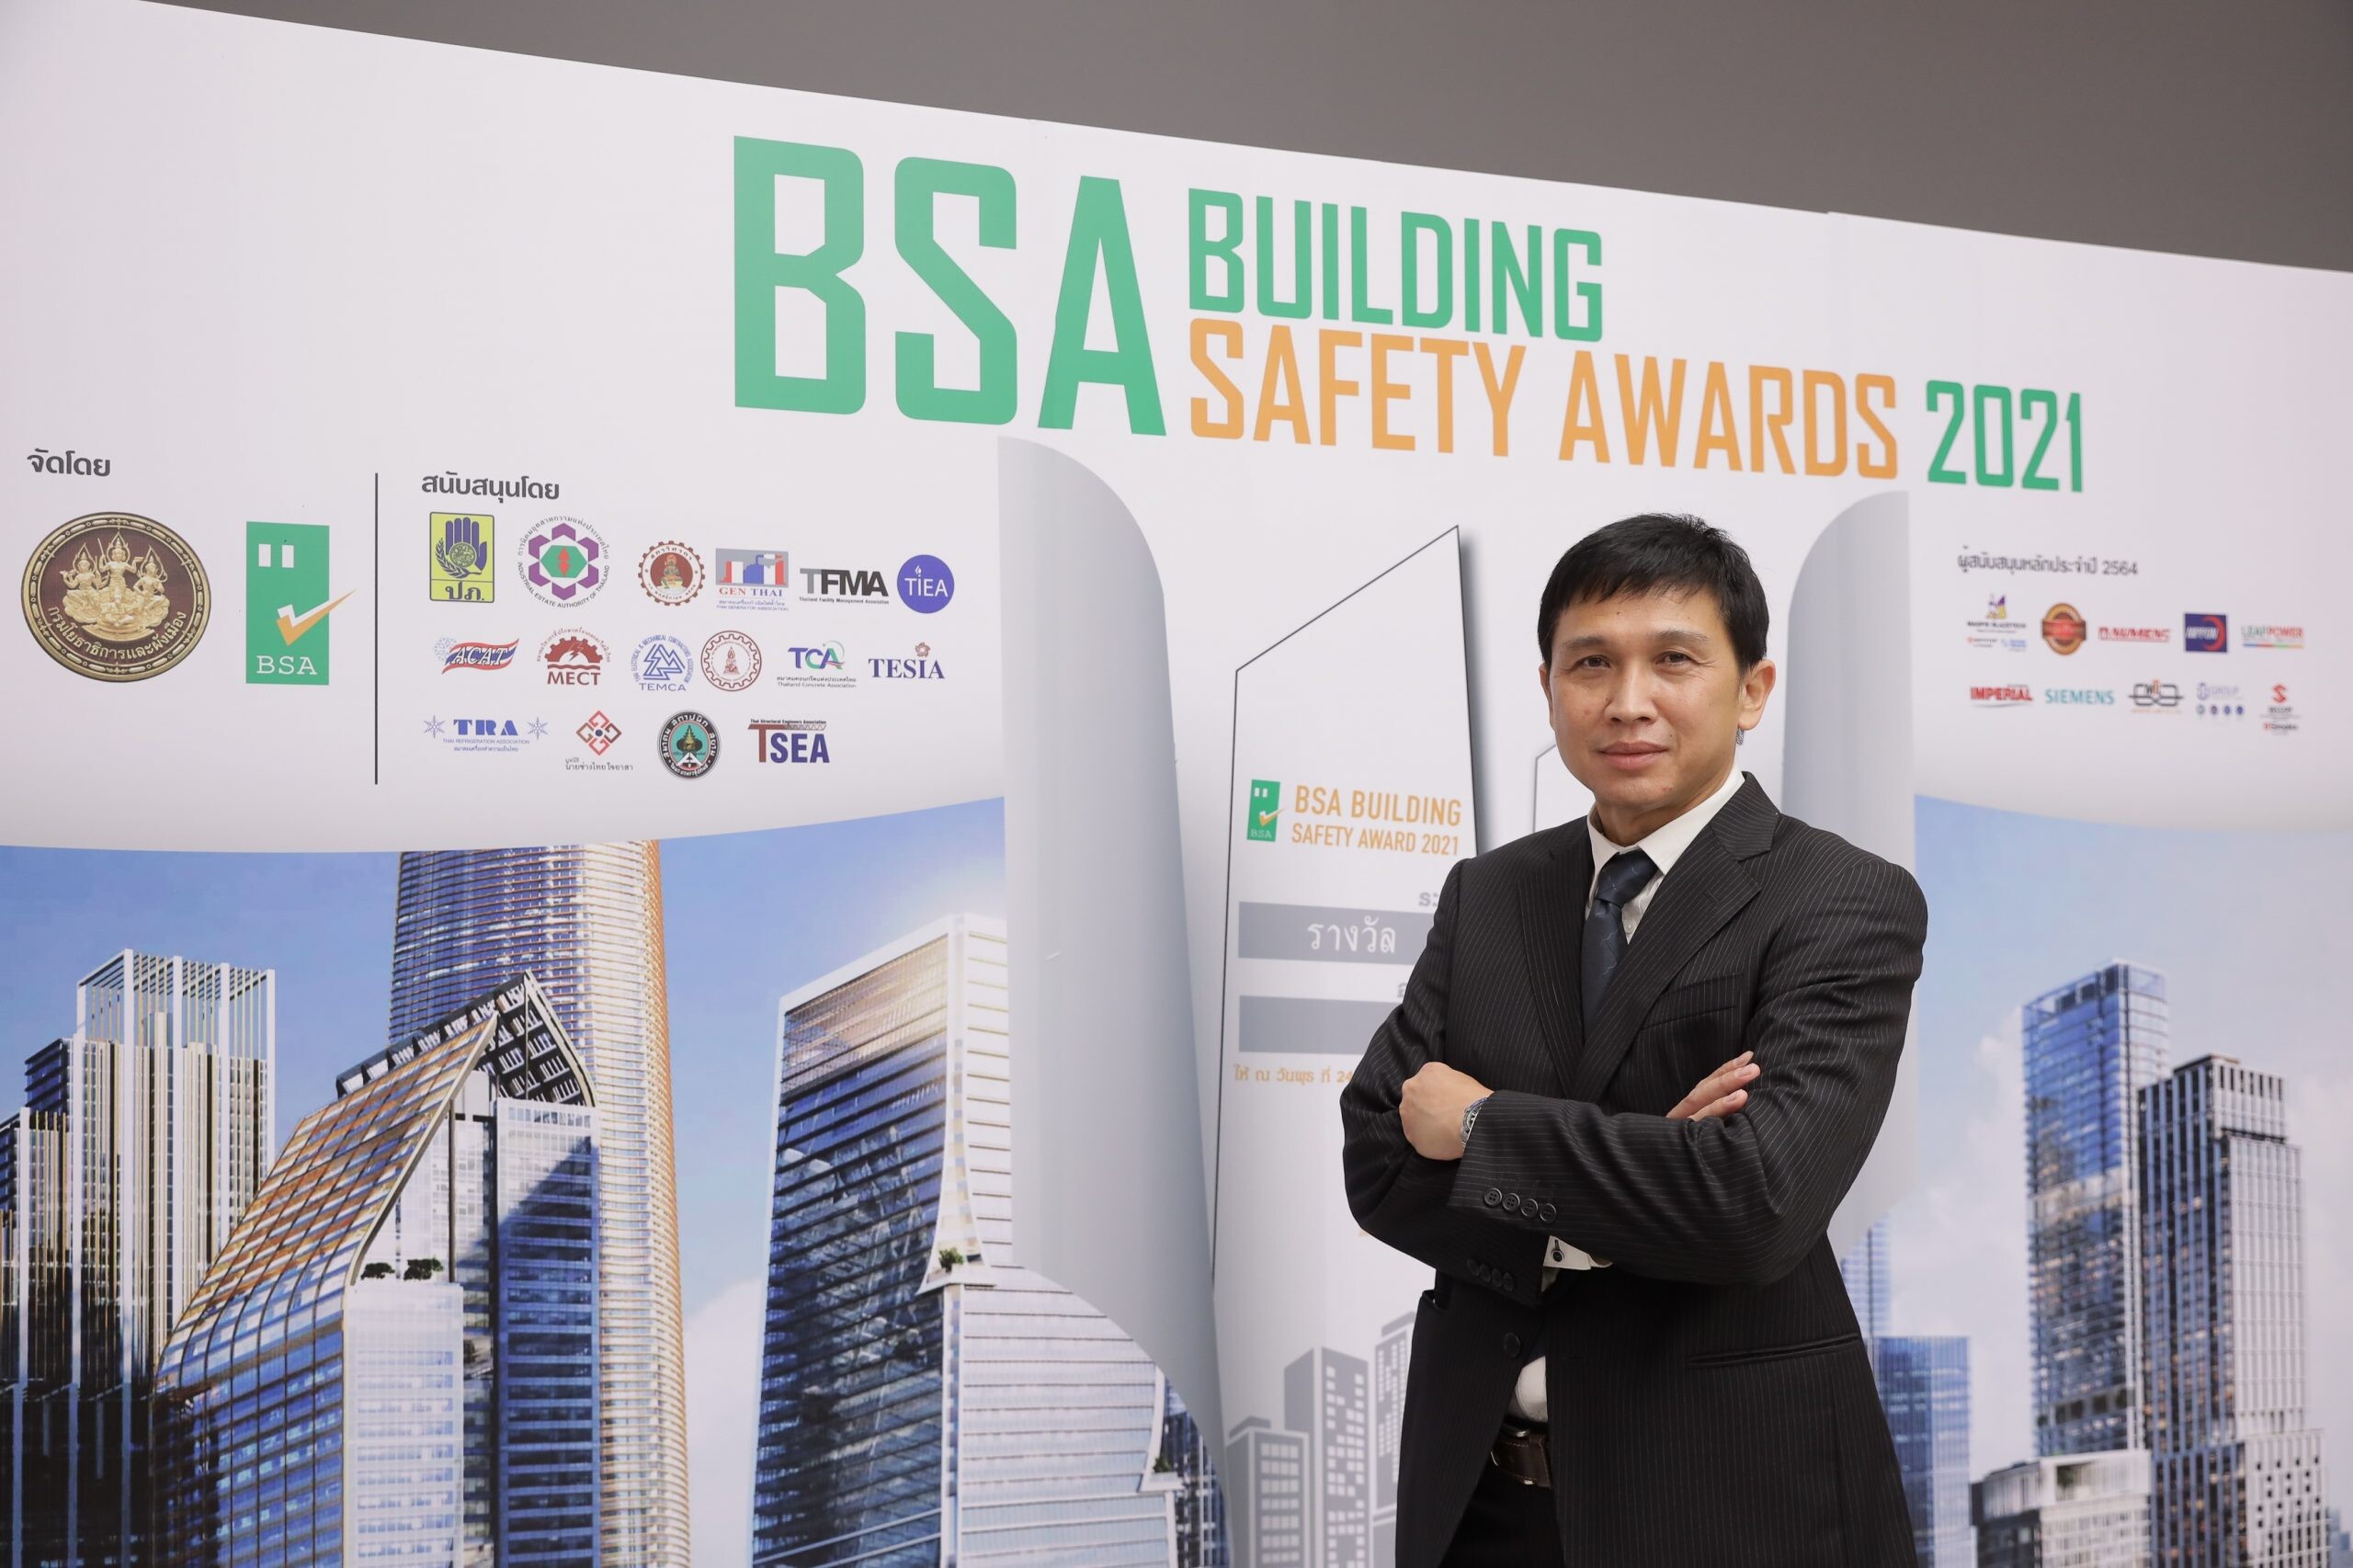 PLUS SWEEPS UP 10 BUILDING SAFETY AWARDS IN DISPLAY OF LEADING POSITION IN PROPERTY MANAGEMENT